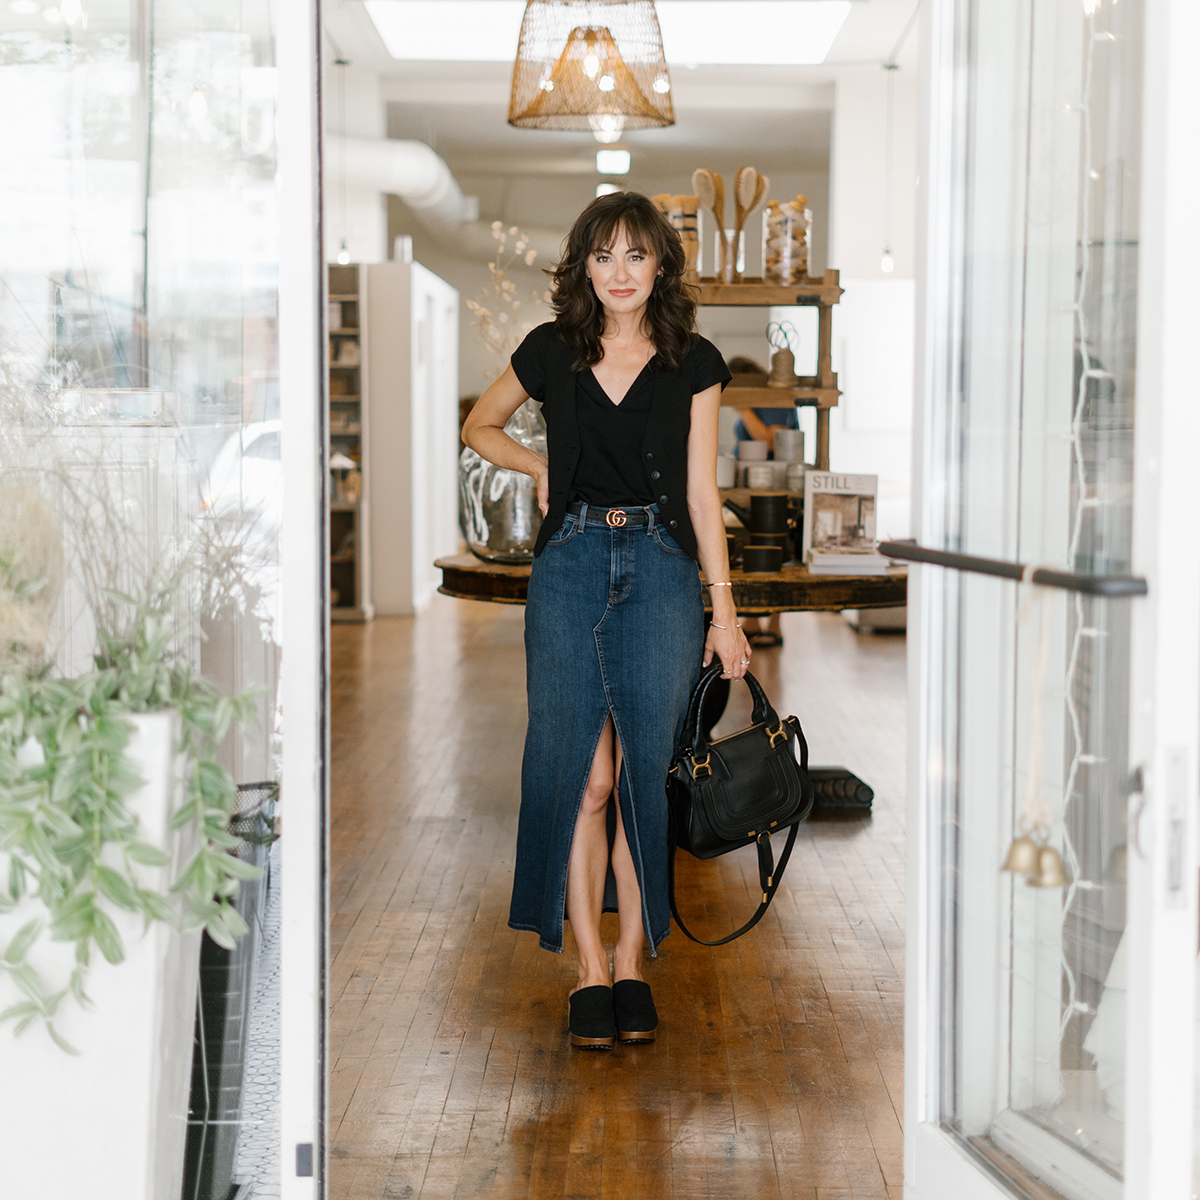 I Worked as a Nordstrom Stylist for Years—This Is My Fall Capsule Wardrobe